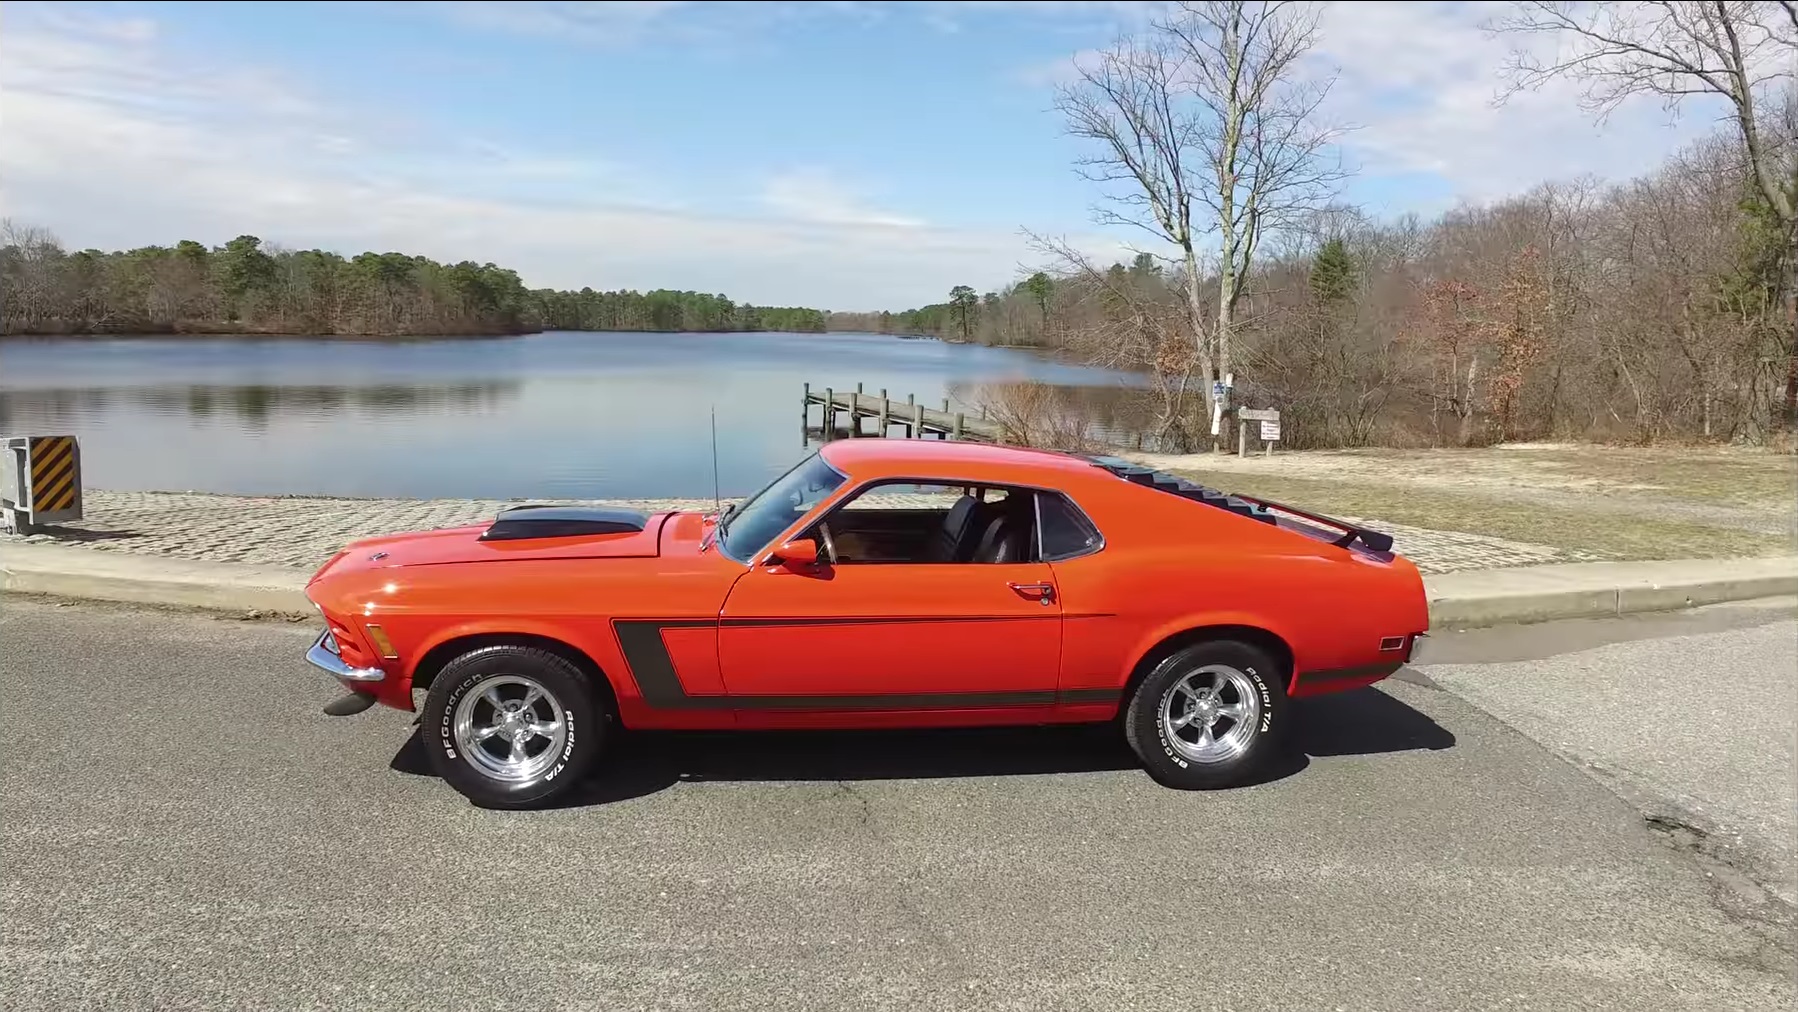 Video: 1970 Ford Mustang Fastback Grabber Edition Quick Tour